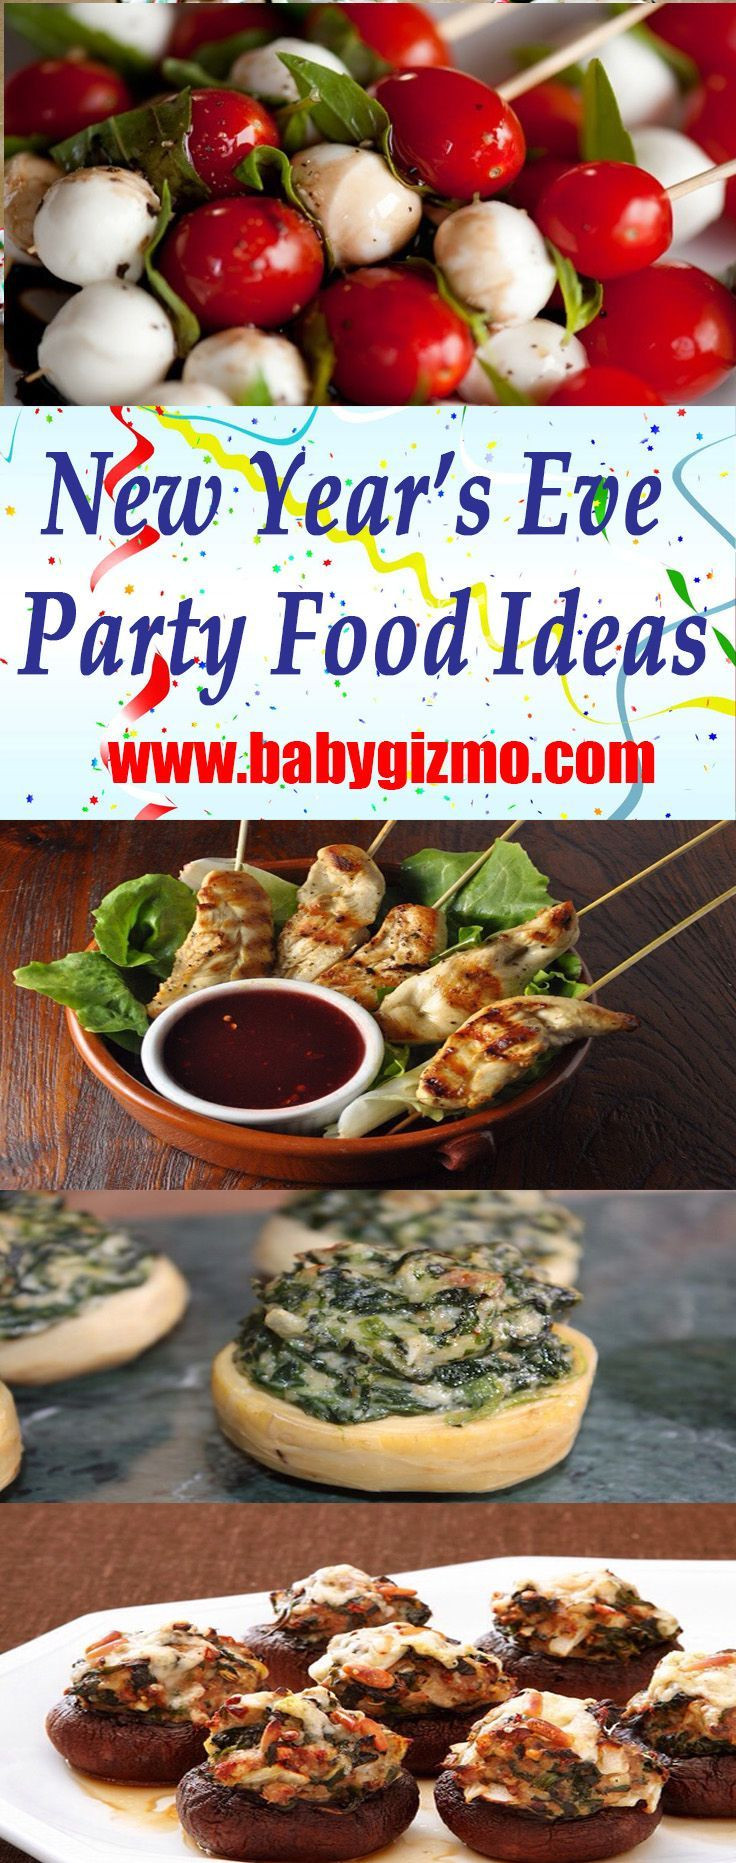 Nye Dinner Party Ideas
 Fabulous Finger Foods For New Year s Eve Parties